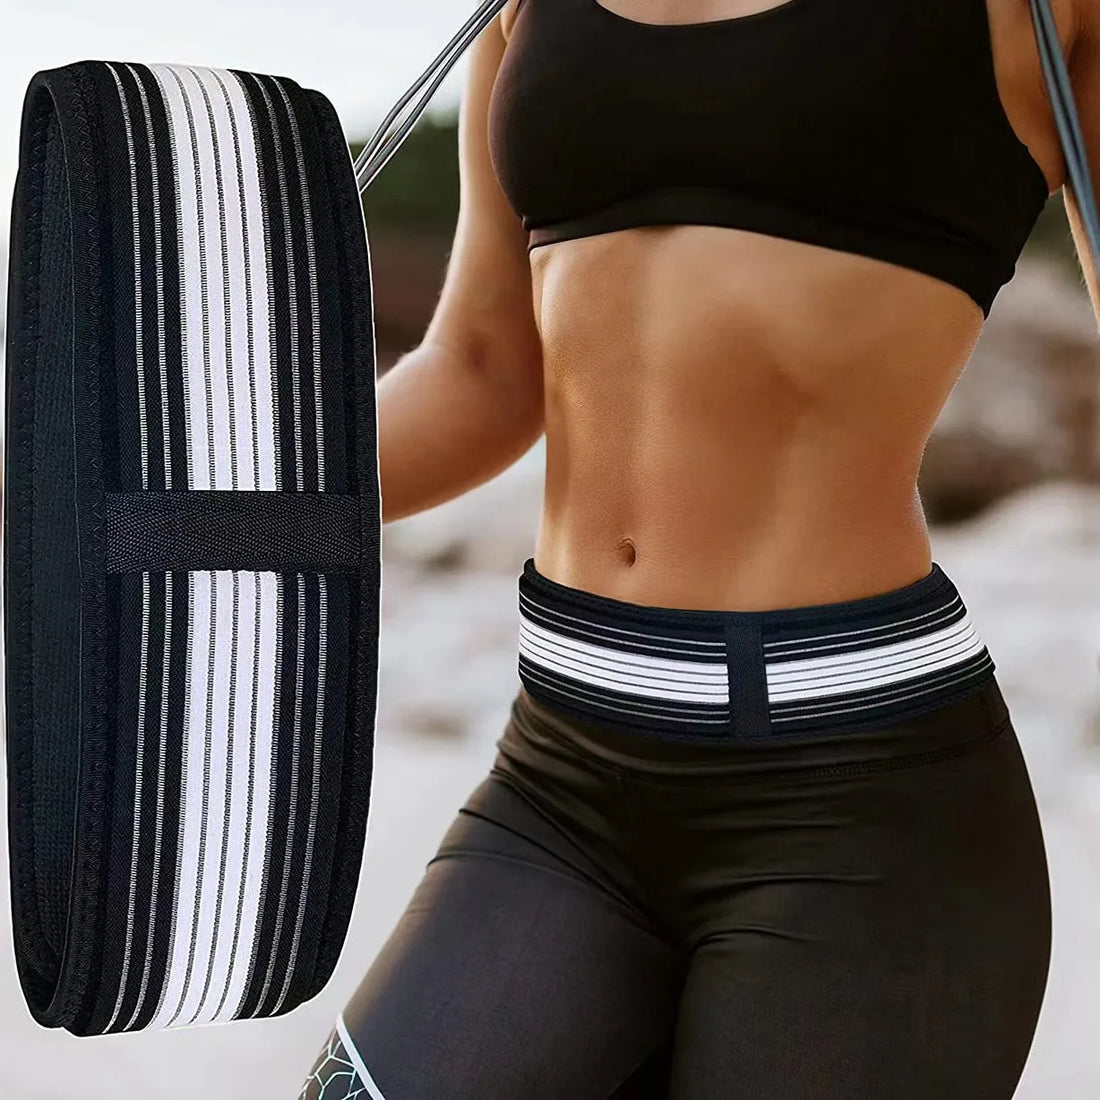 A fit woman with defined abdomen and lower back pain, wearing a black sports bra and shorts, uses a Soulful Trading Joint Hip Belt for exercise.